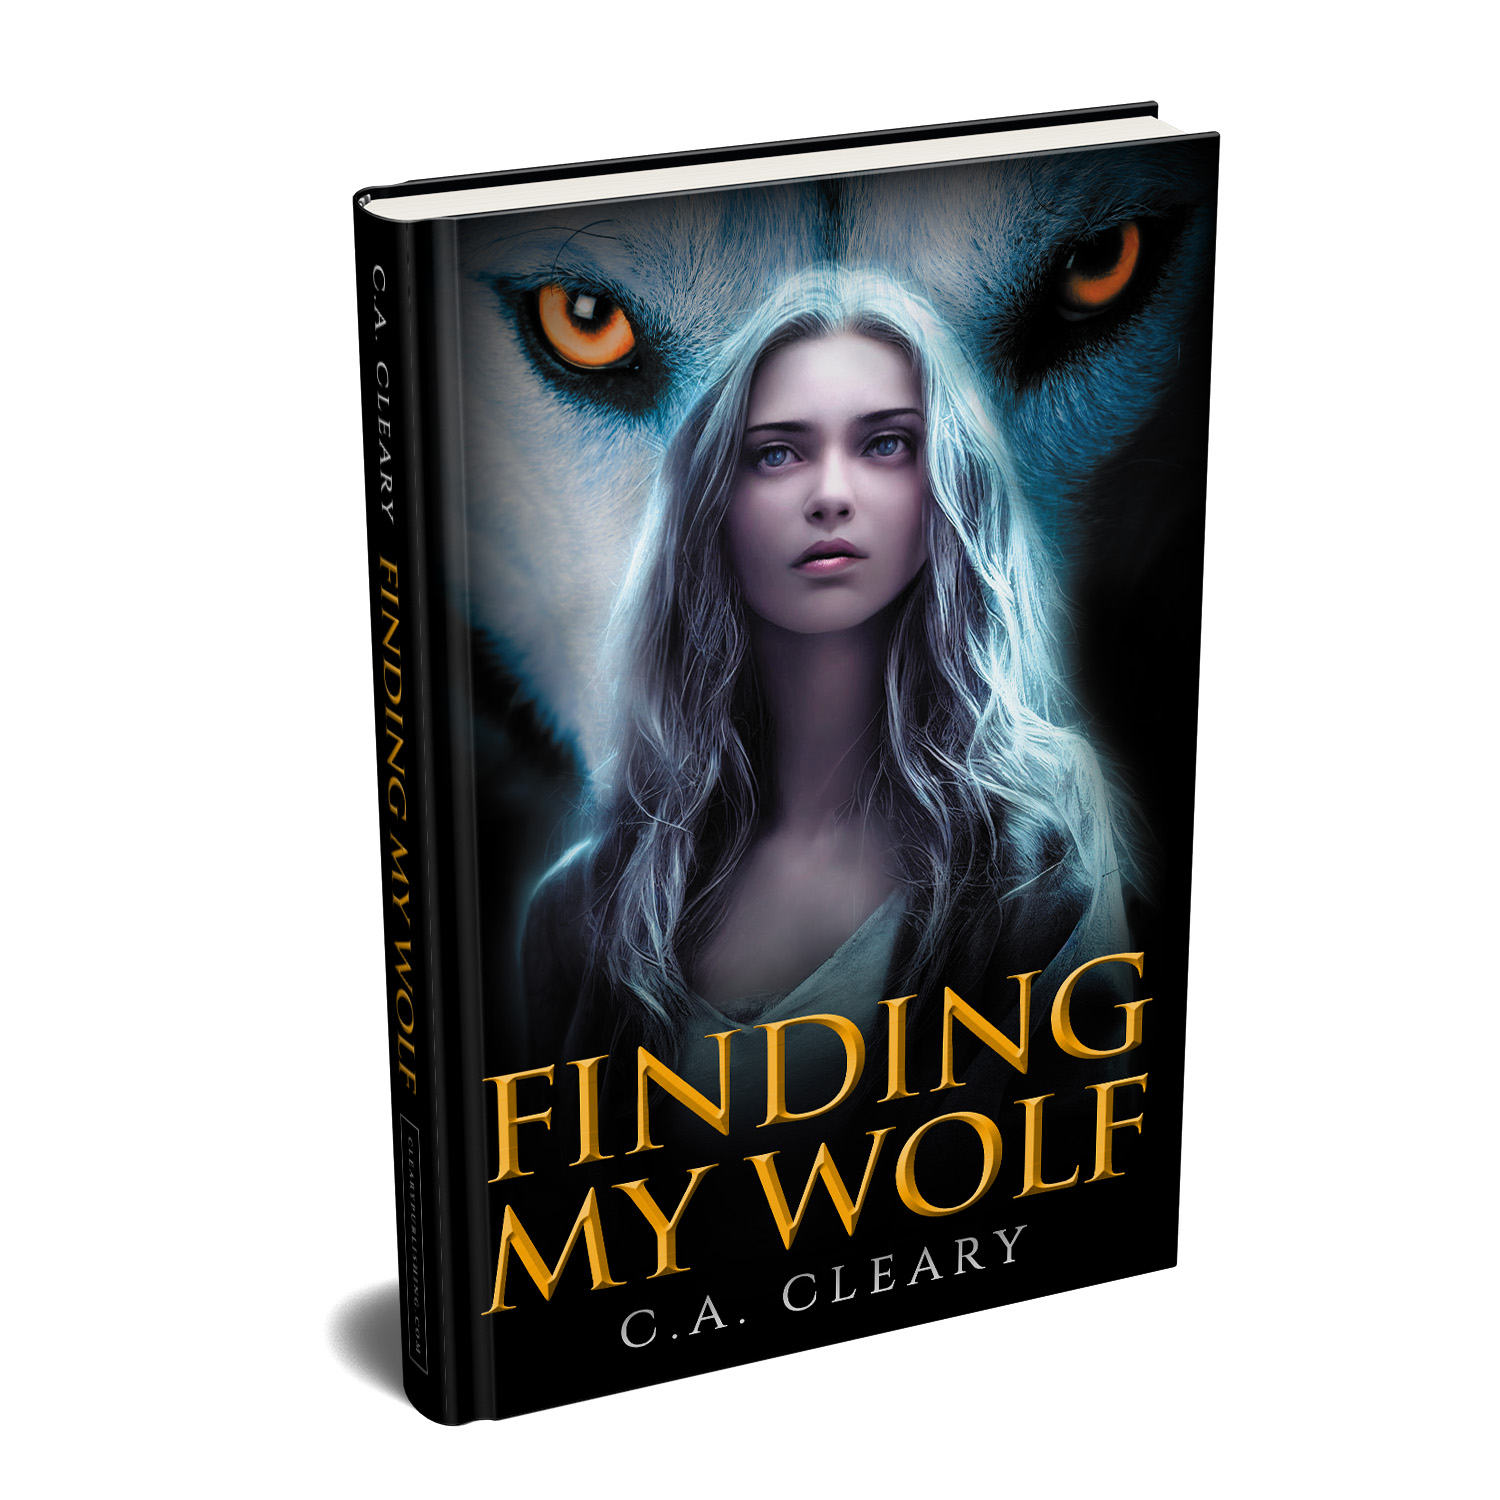 'Finding My Wolf' is a hot-blooded lycanthrope fantasy romance. The author is C. A. Cleary. The book cover design and interior formatting is by Mark Thomas. To learn more about what Mark could do for your book, please visit coverness.com.